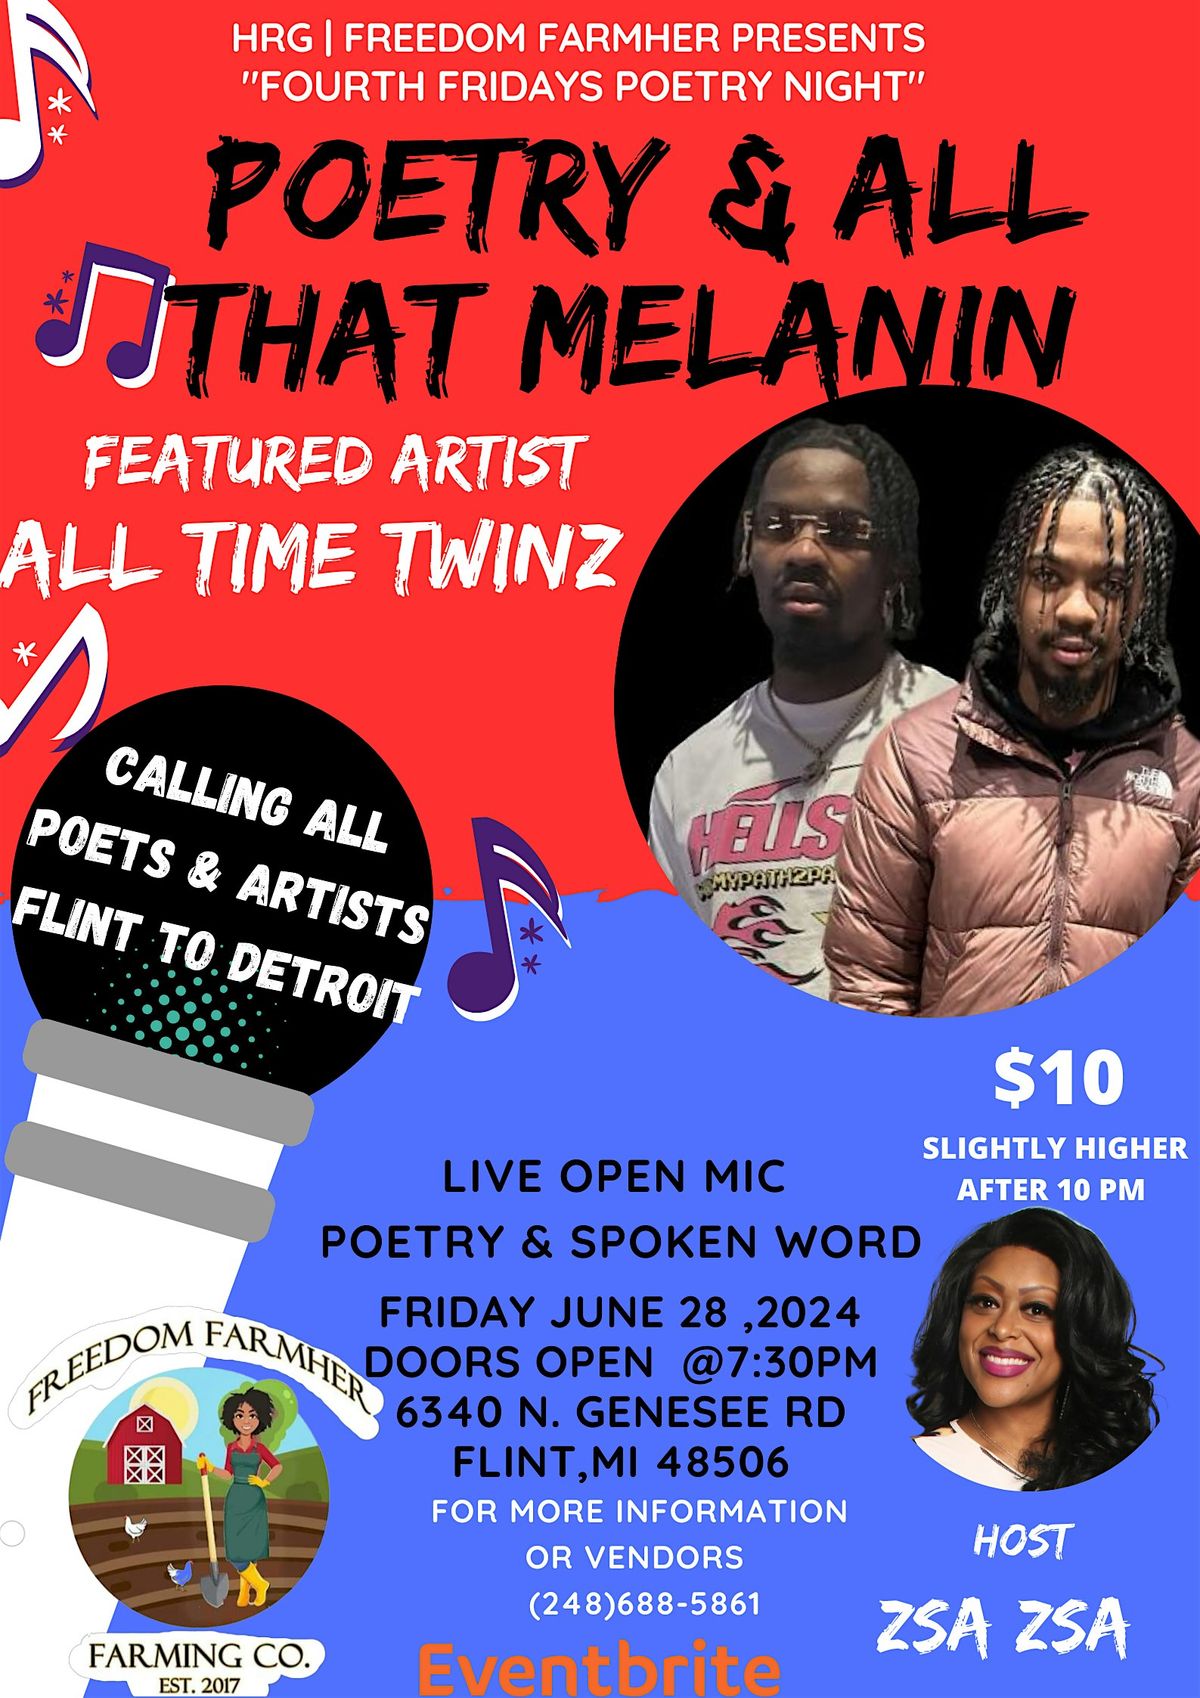 FOURTH FRIDAY POETRY & OPEN MIC IN FLINT (SAFE SPACE)6340 N. GENESEE RD